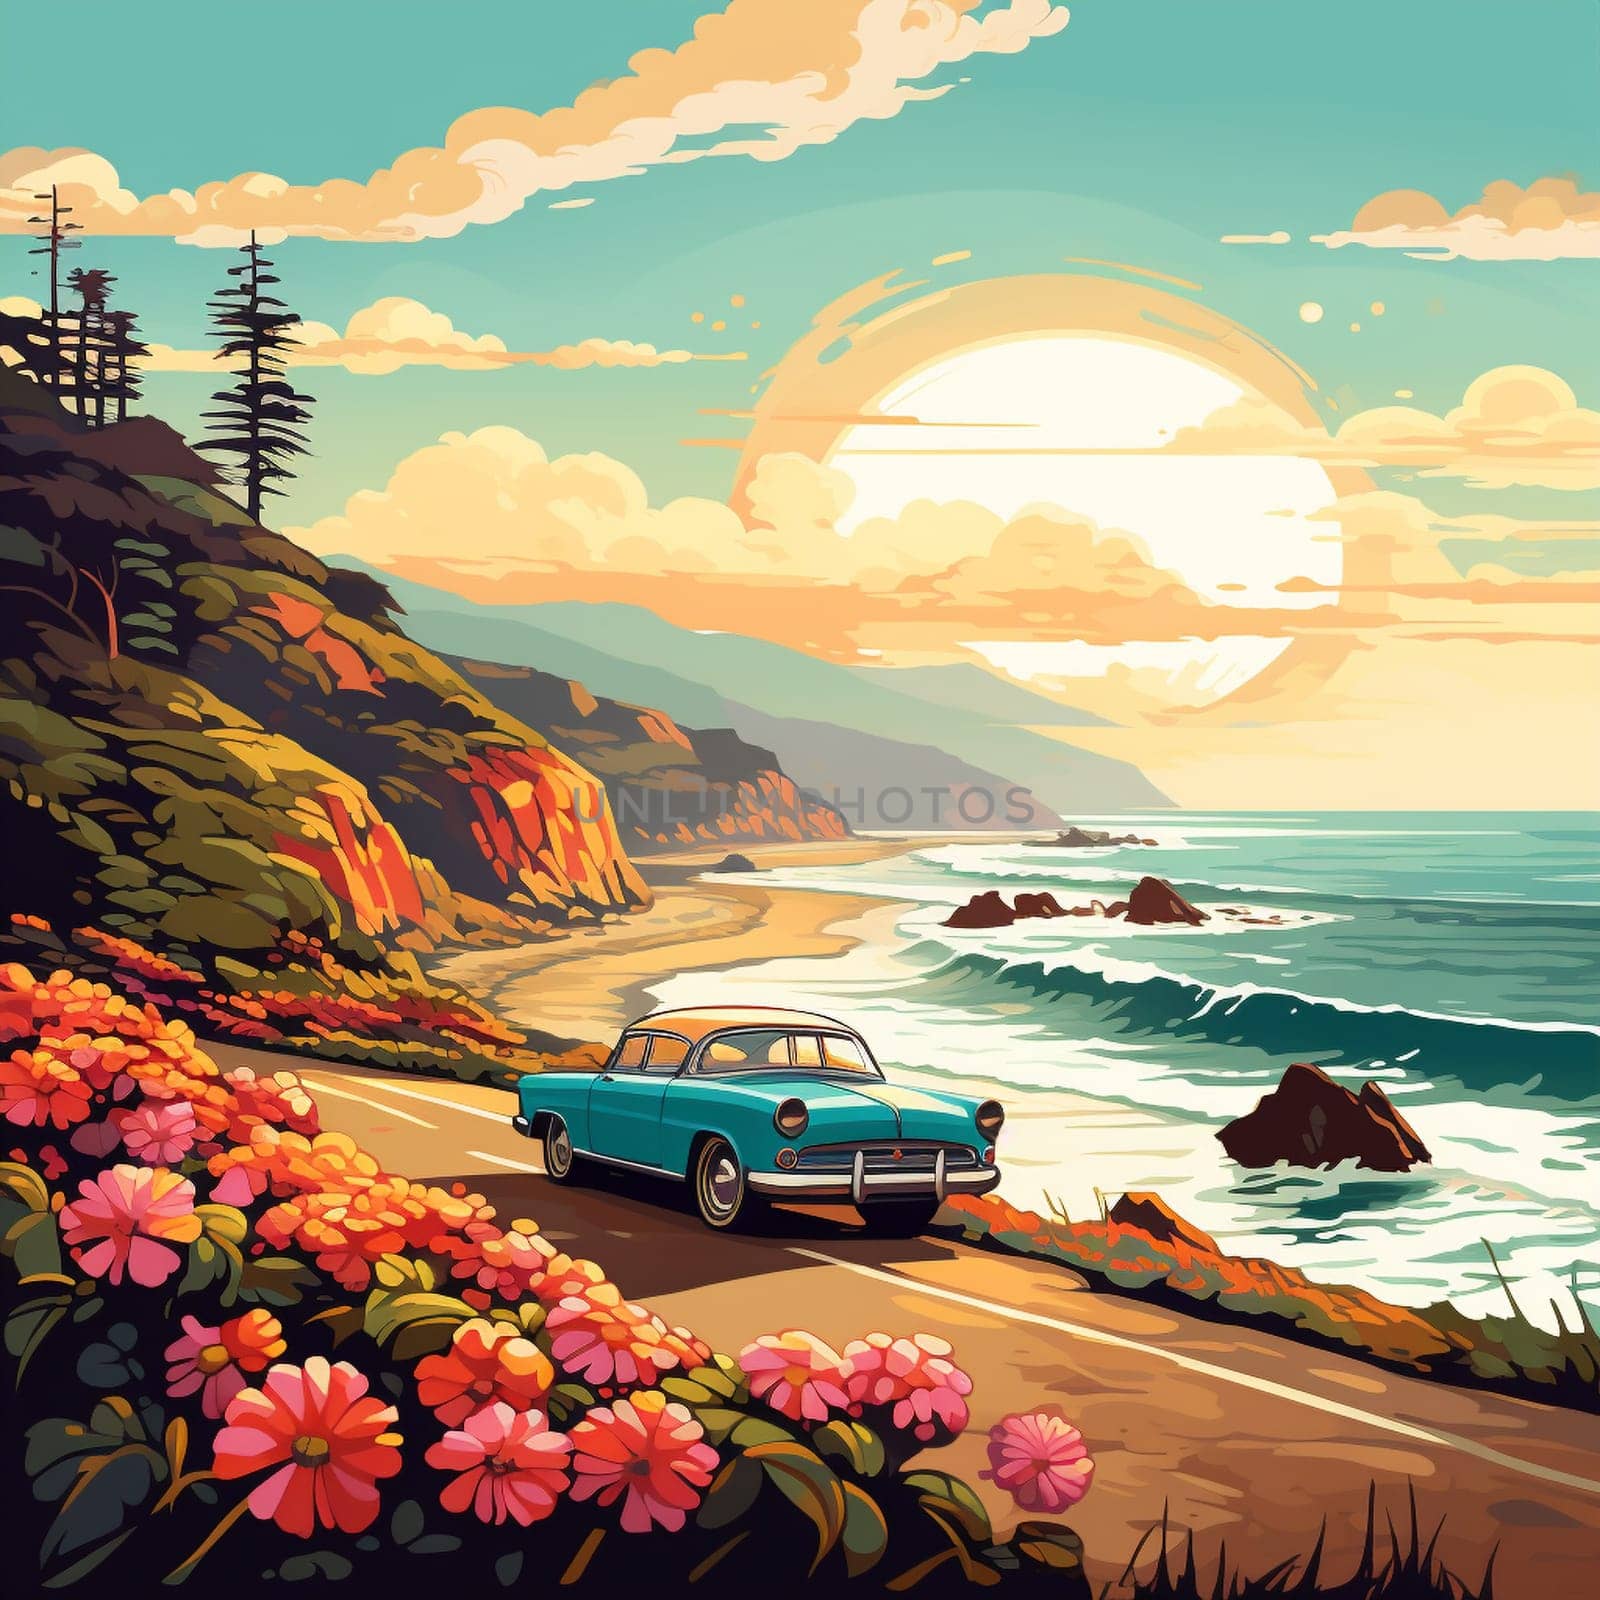 Vintage car adorned with colorful flower decals, driving down a sunlit coastal road by Sahin